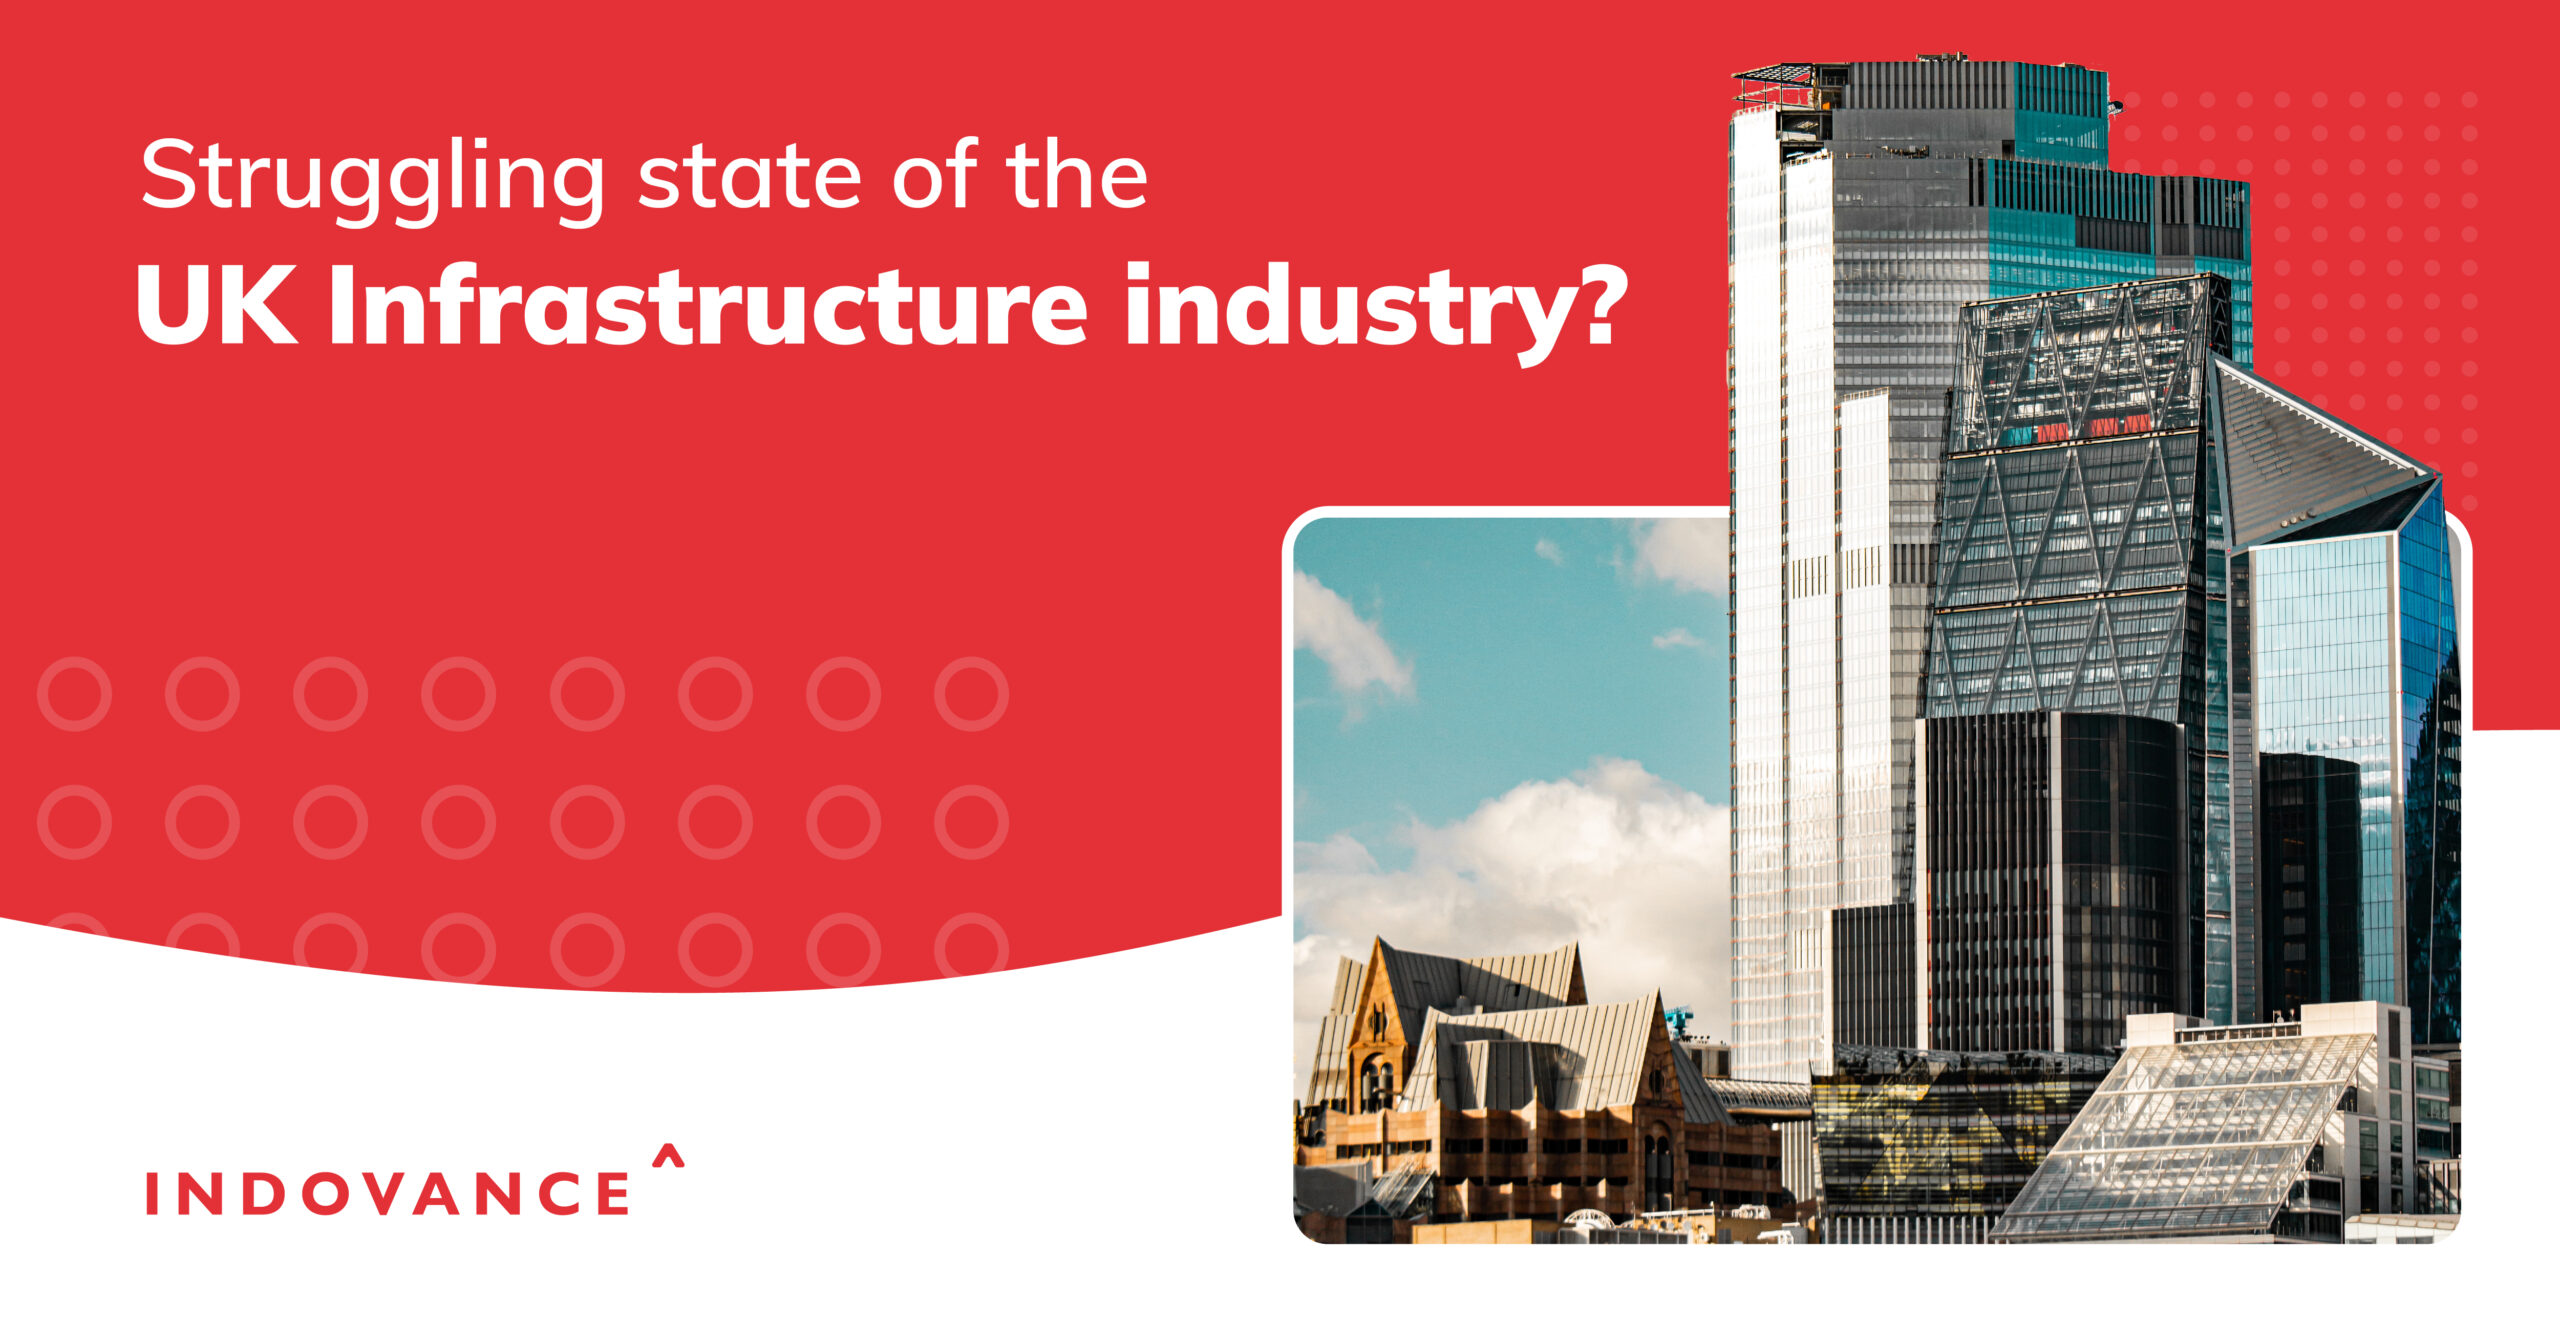 Struggling state of the UK Infrastructure industry?